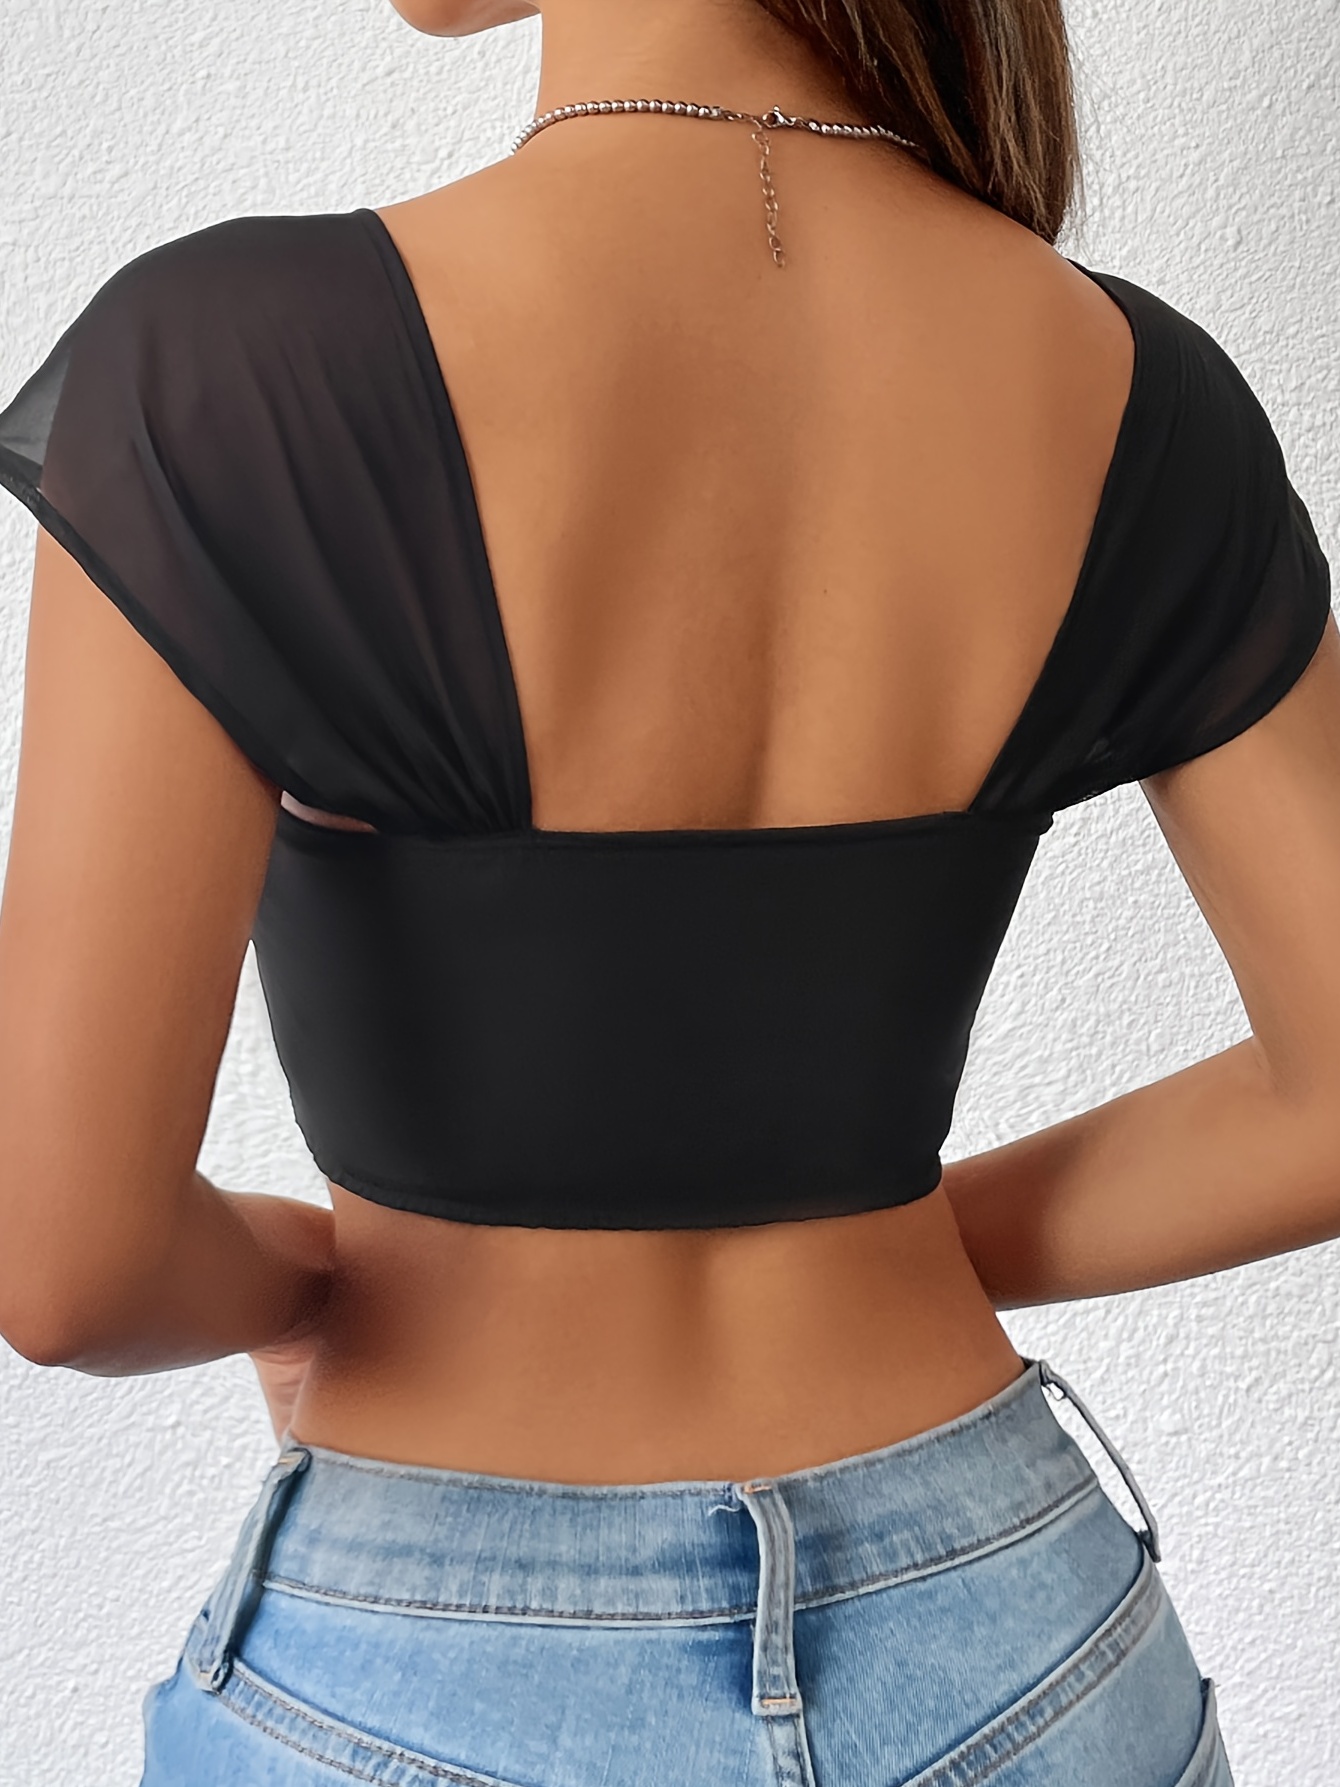 Women's Tank Top Sexy Lace Street Style Black Cami Corset Tops